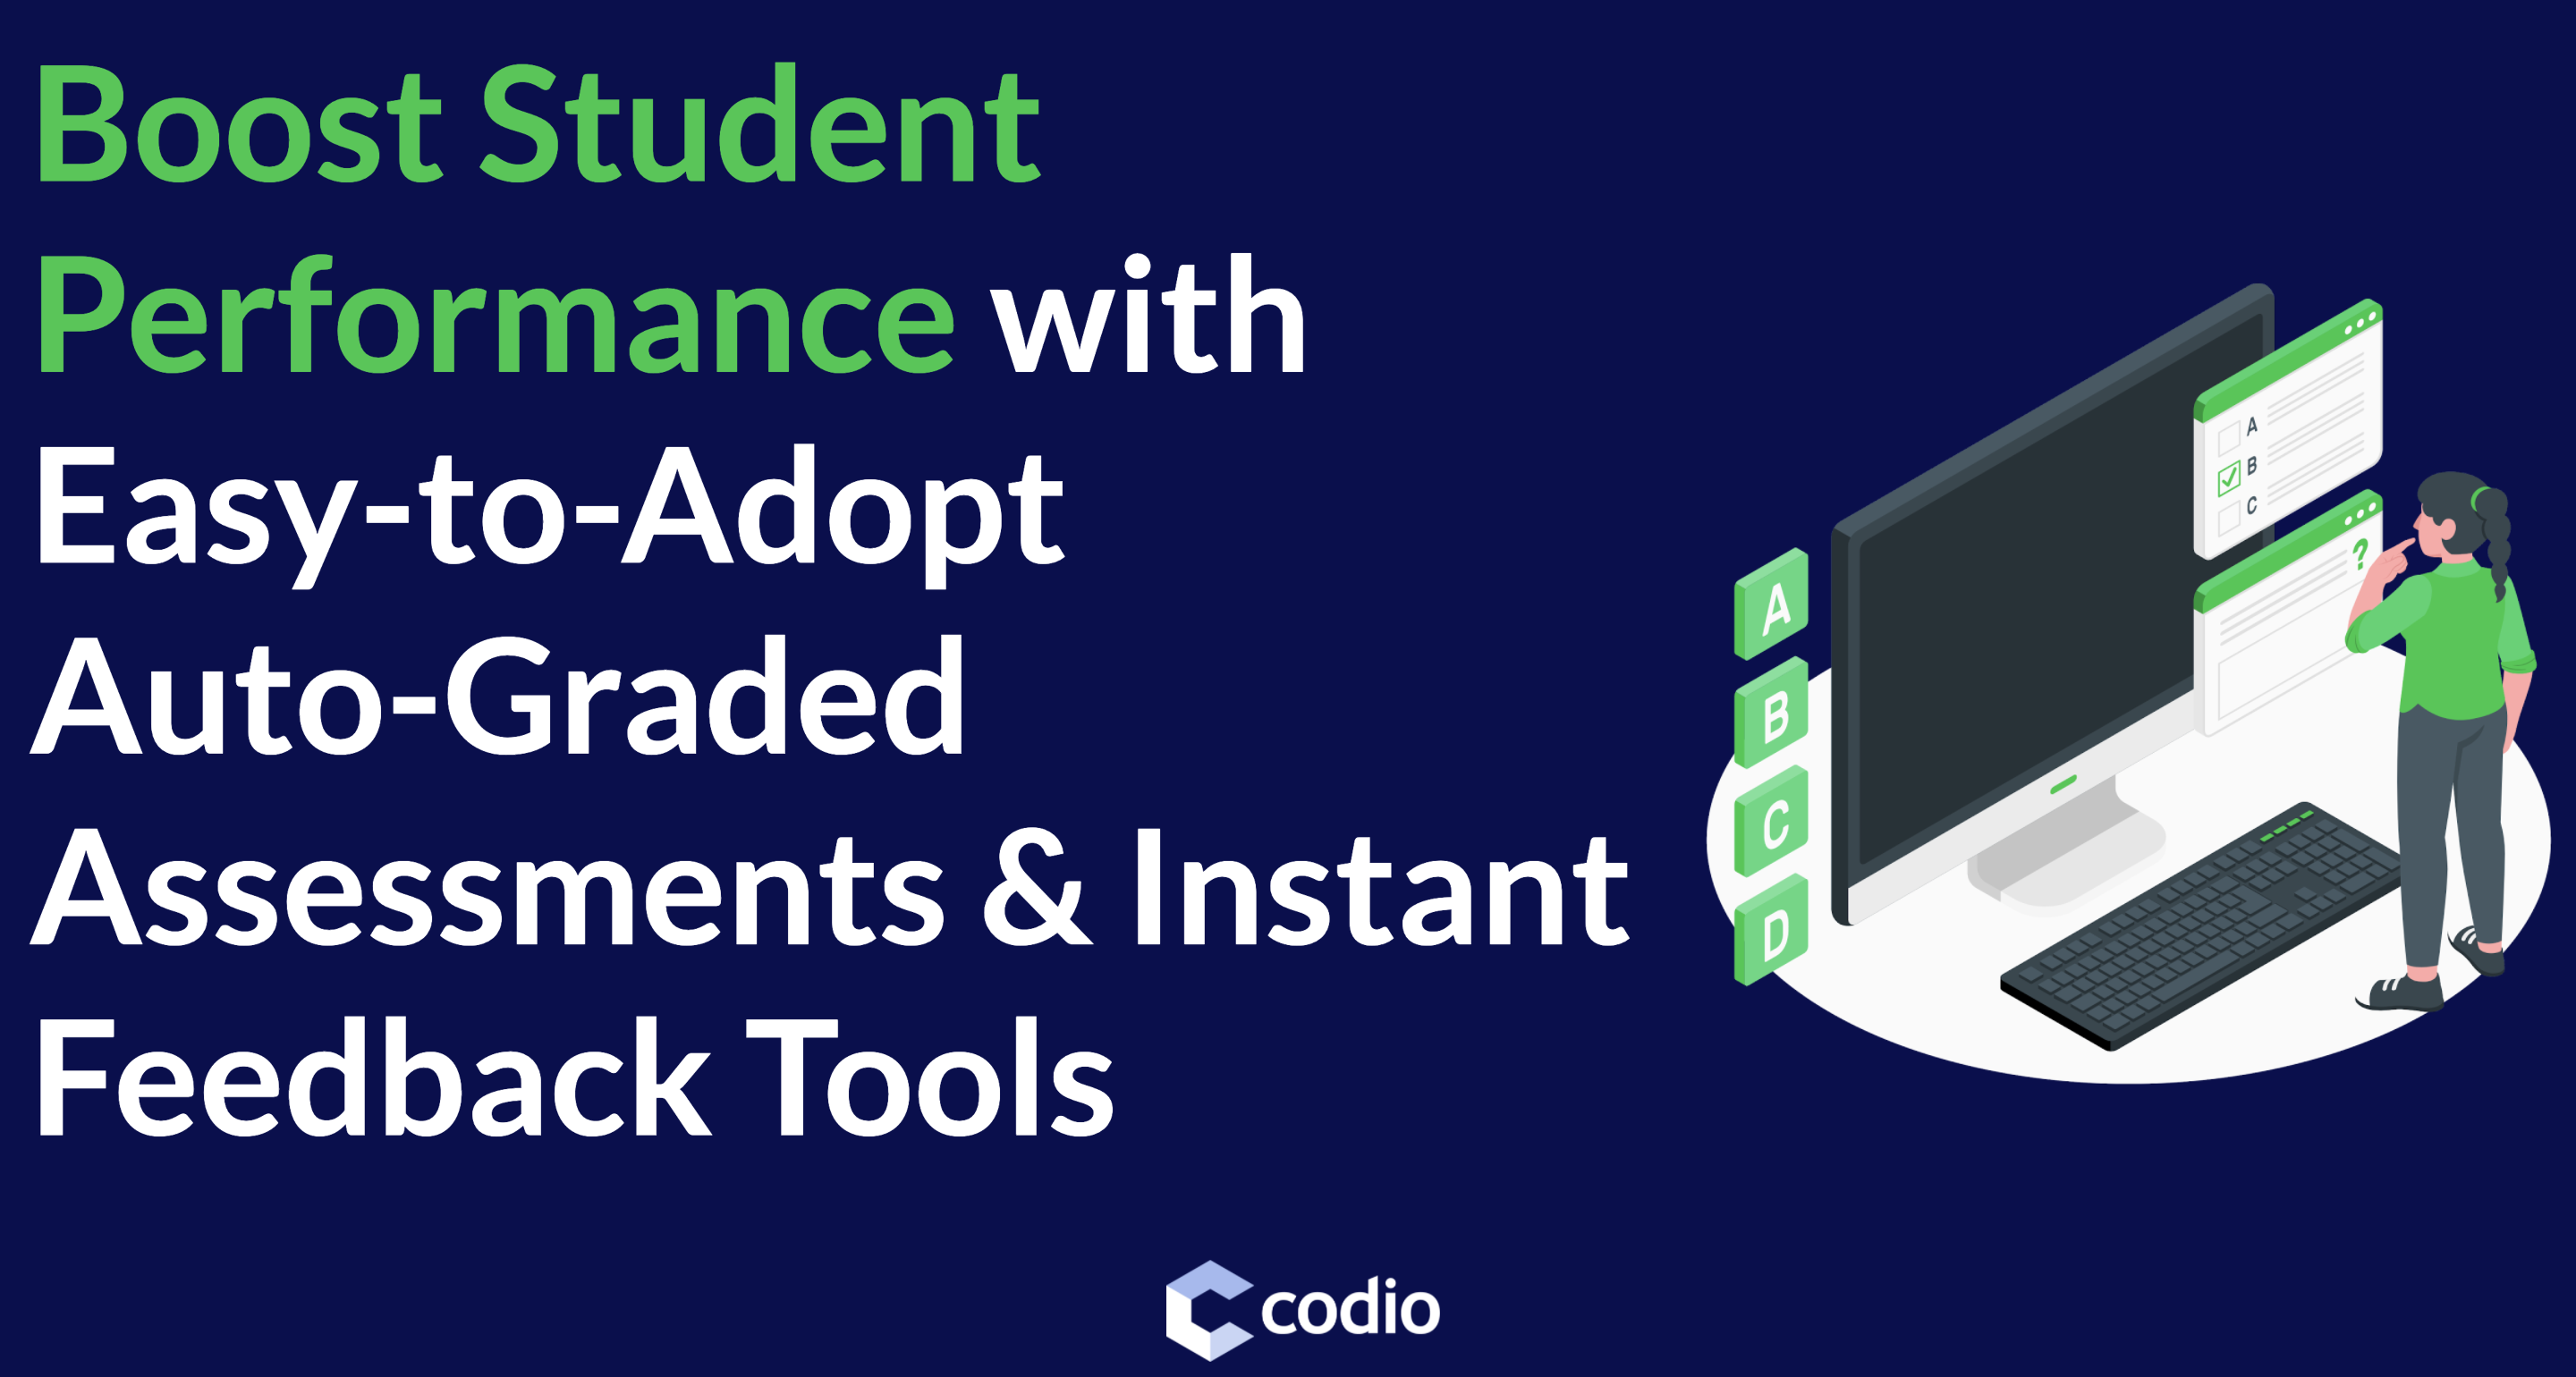 Boost Student Performance & Satisfaction with Easy-to-Adopt Auto-Grading & Instant Feedback